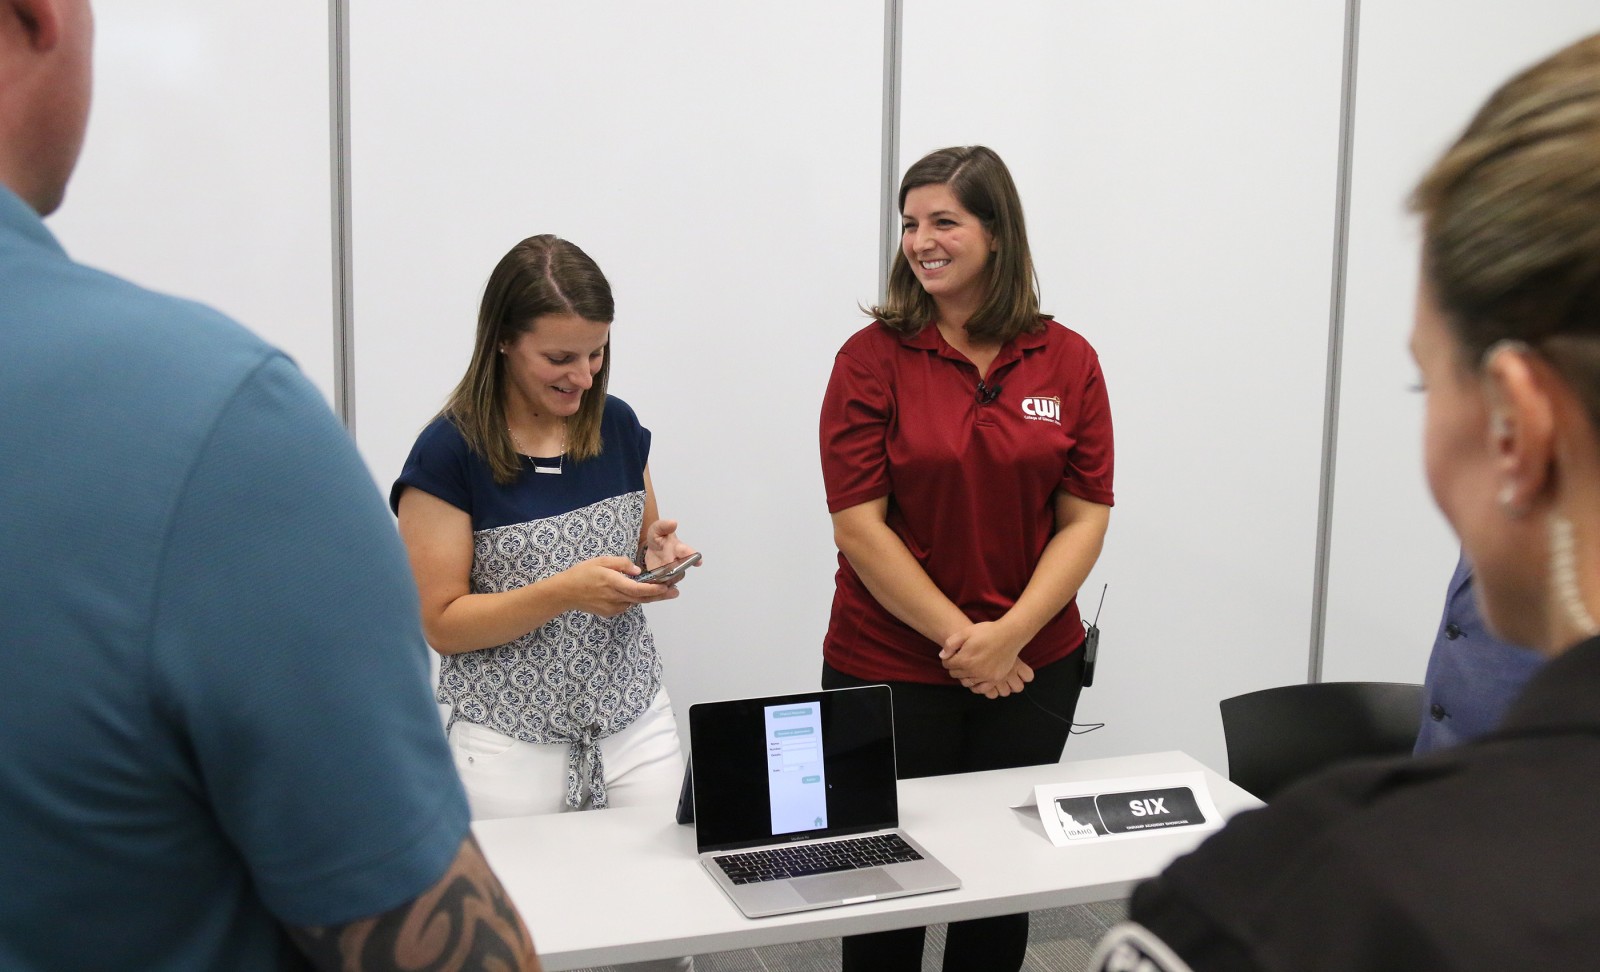 CWI's Sarah Strickley, right, participates in an Onramp event at the Idaho Digital Learning Alliance in 2019.